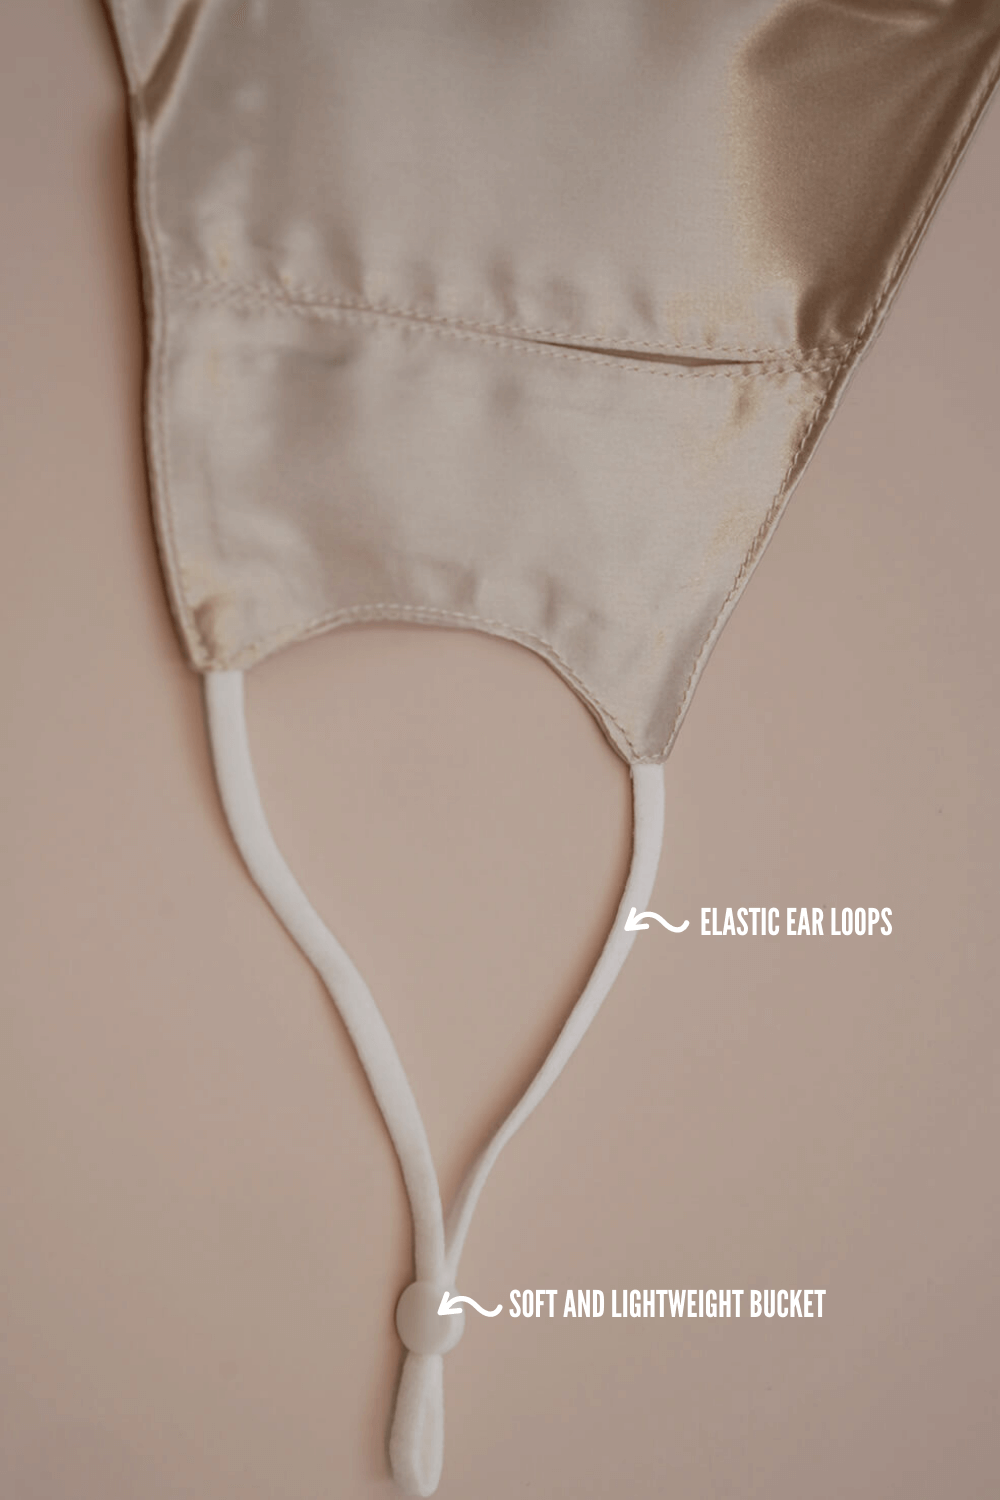 STELLAR Silk Face Mask - Wine (with Nose Wire and Filter Pocket) - BASK™